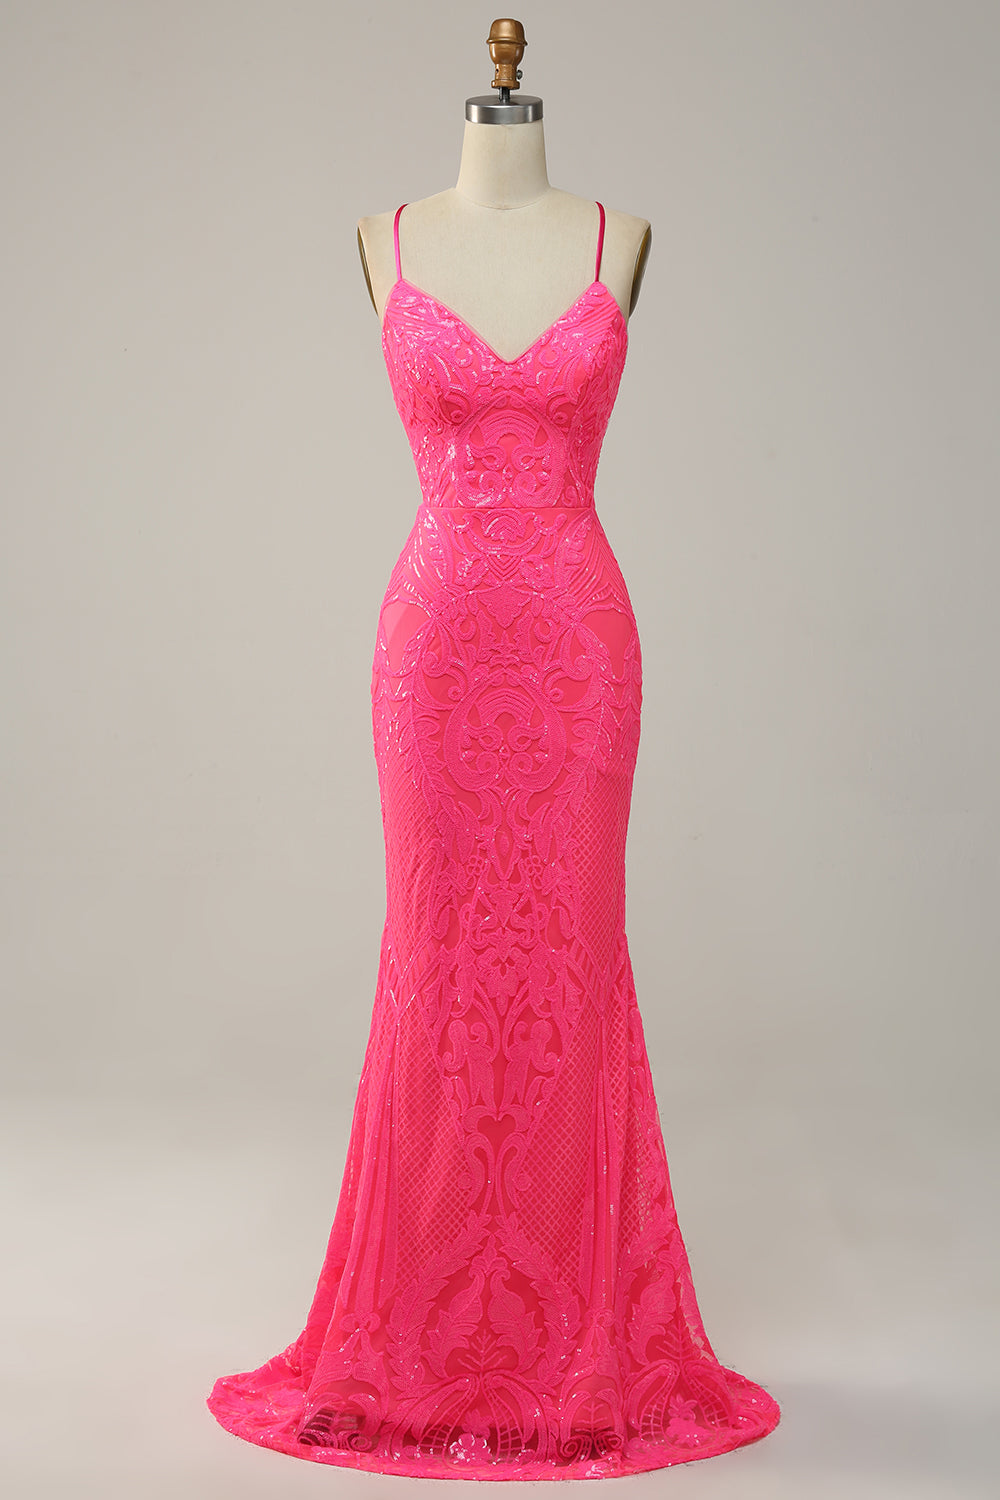 Mermaid Spaghetti Straps Sequined Hot Pink Long Prom Dress